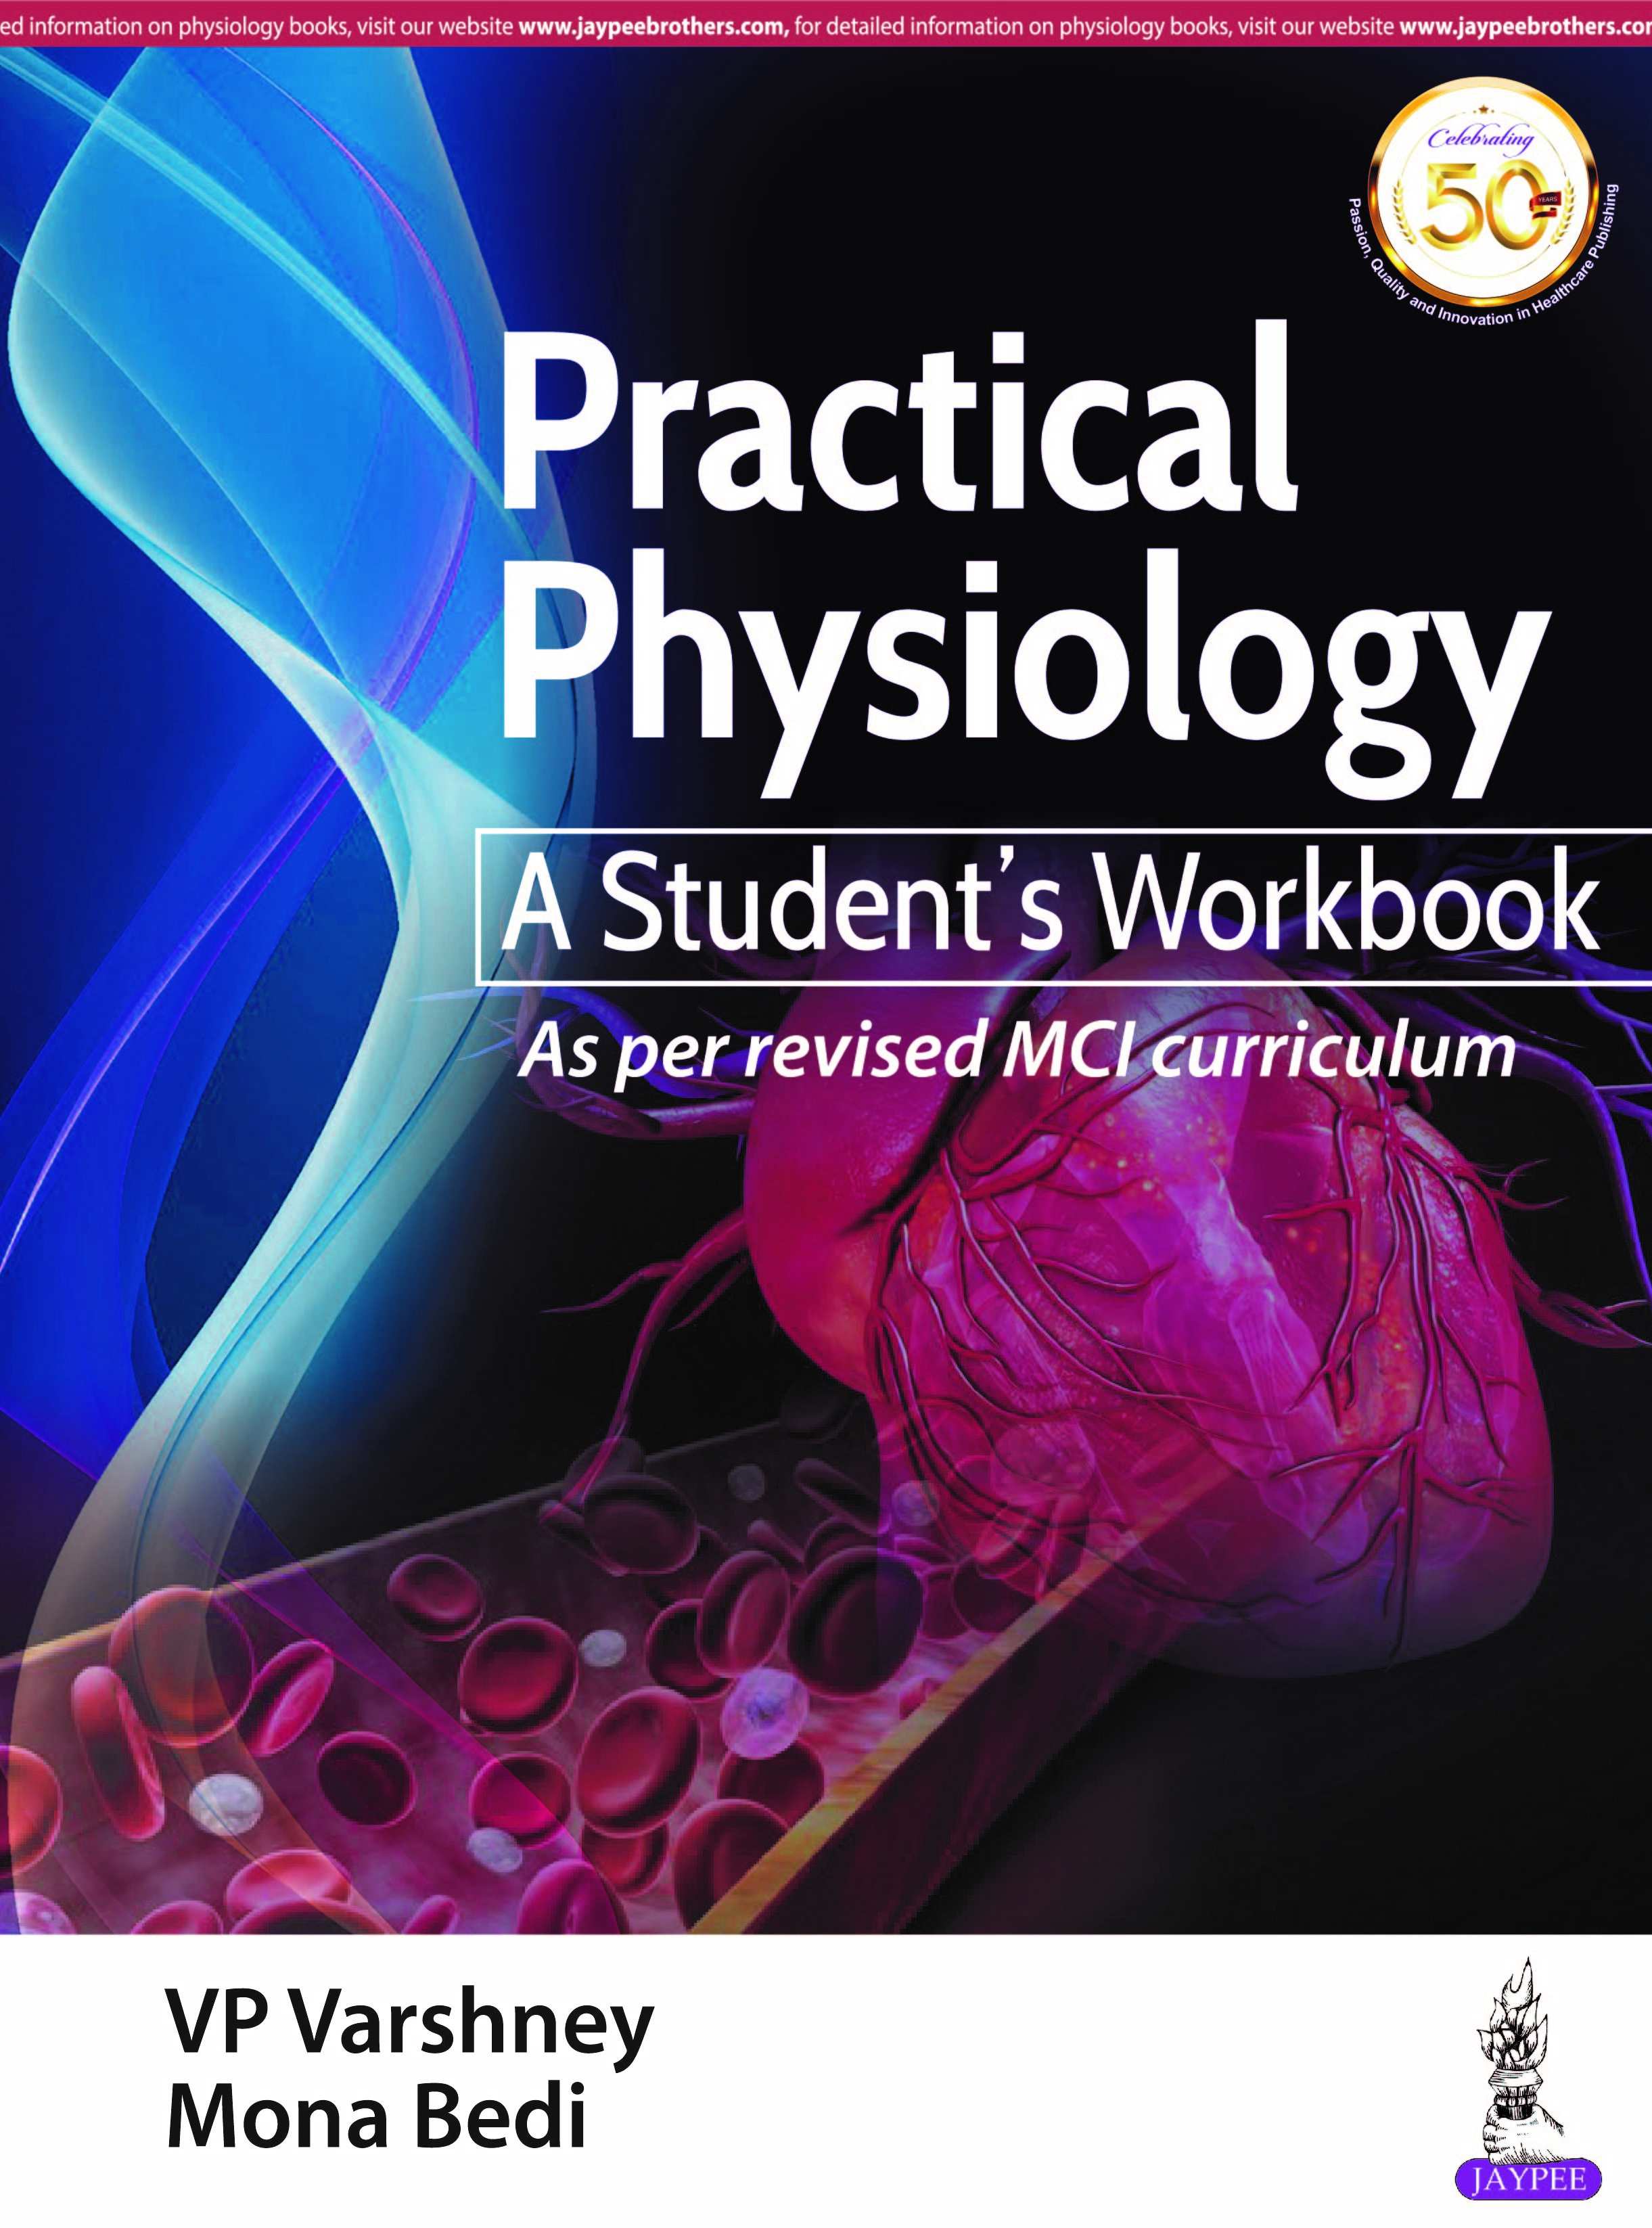 Practical Physiology A Student's Workbook